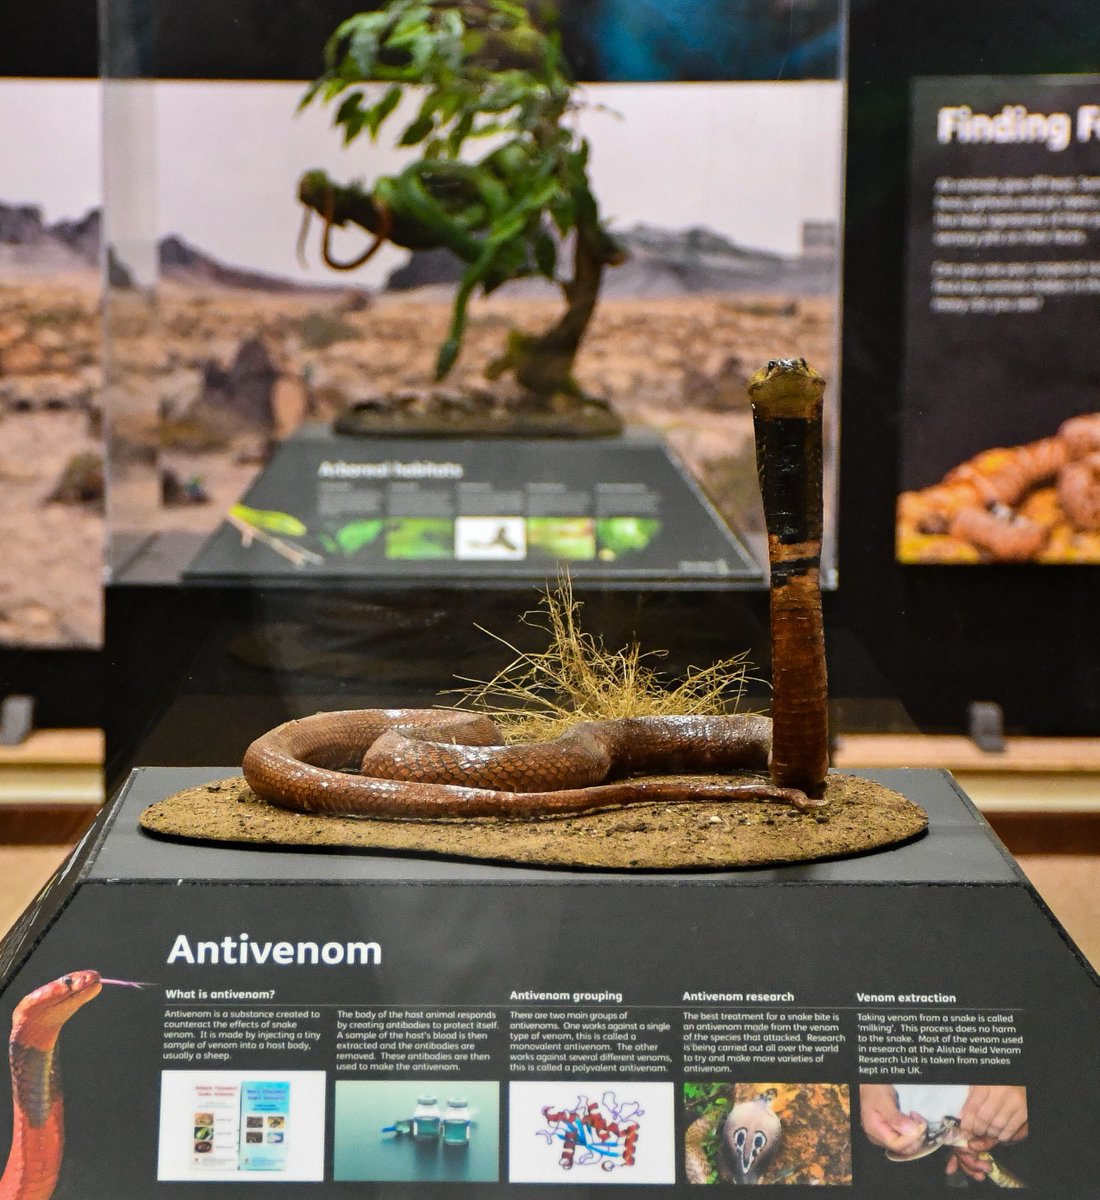 🐍 Don’t miss out on Snakes! 🐍

👪 Visit this family-friendly exhibition to explore the secretive lives of these fascinating reptiles

📅 Now until Sunday 28 April
🎟 Free with zoo entry!

👉 durrell.org/events/snakes

'Snakes’ is a @bluetokay exhibition supported by Ferryspeed